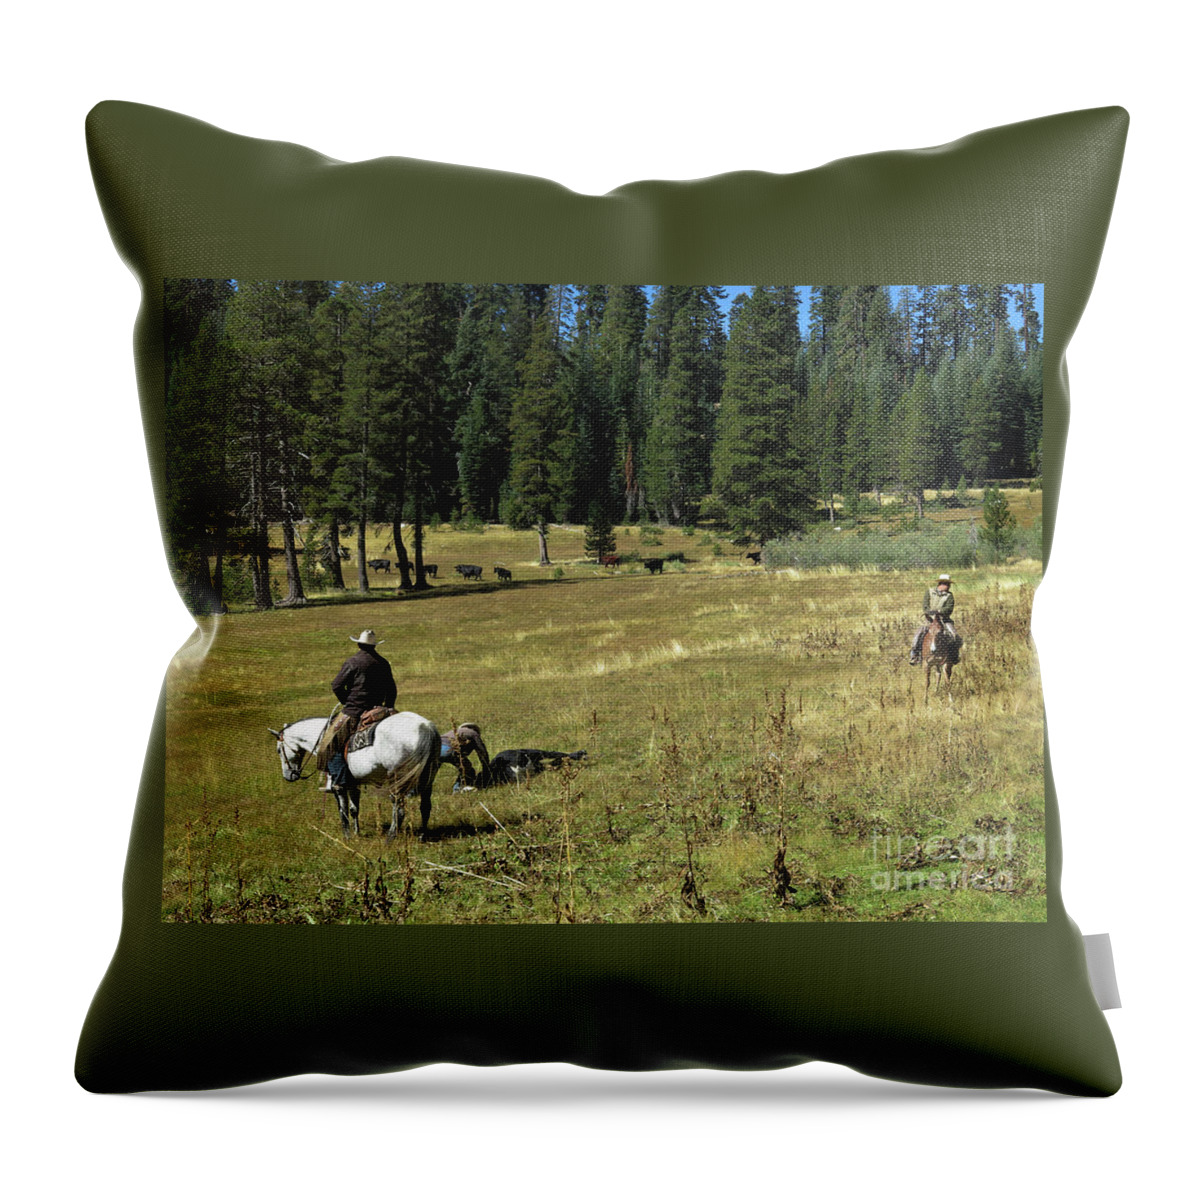 Horses Throw Pillow featuring the photograph Field Doctoring by Diane Bohna